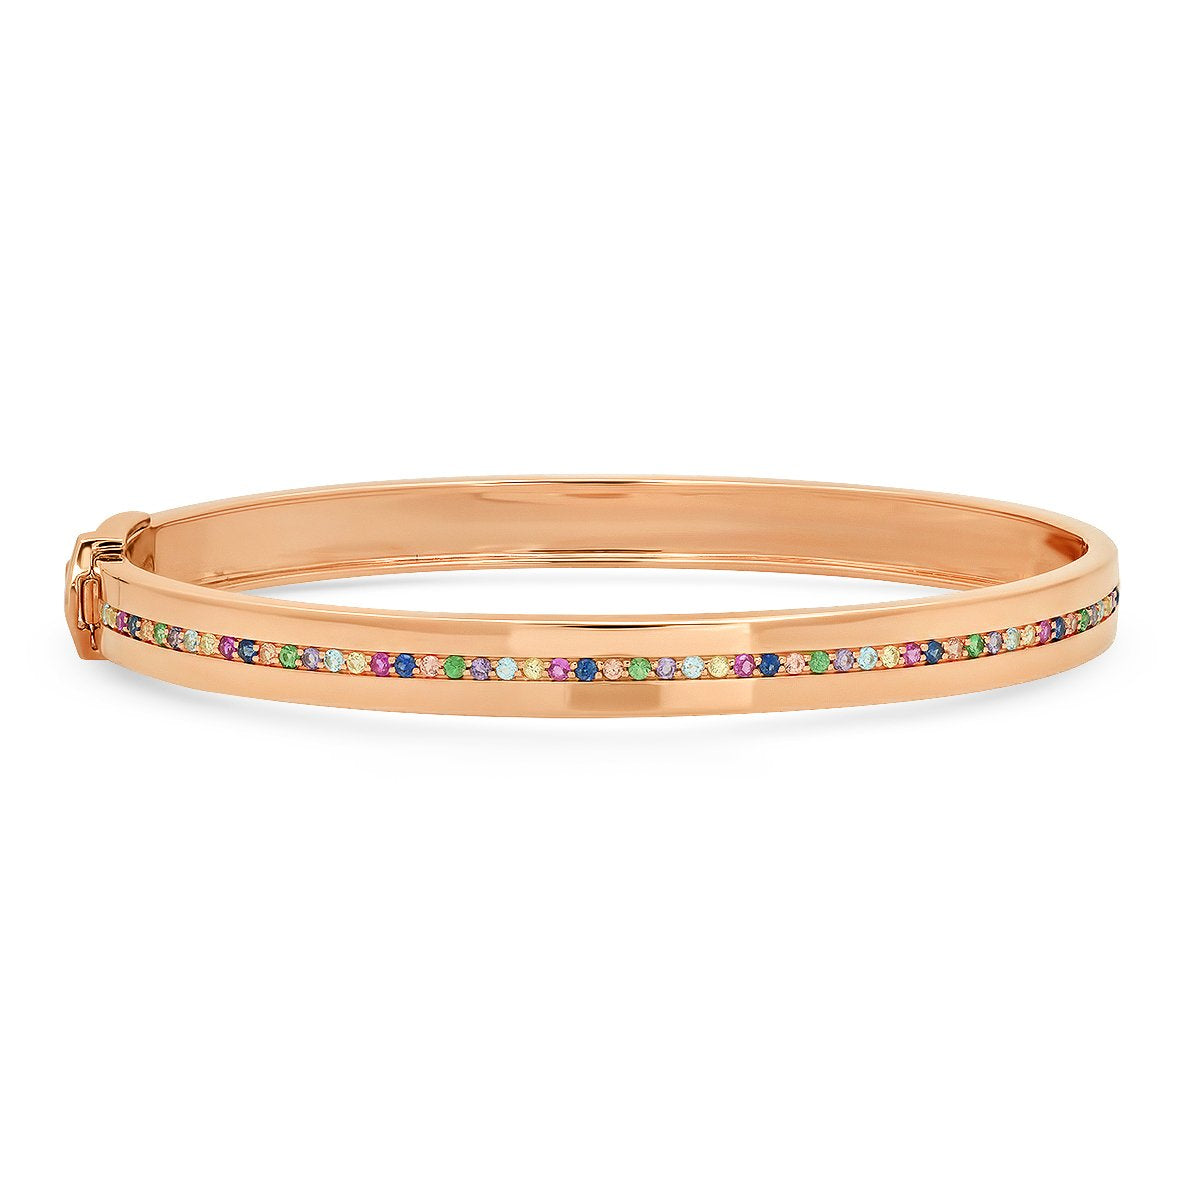 14K Rose Gold Bangle with Multi Colored Row